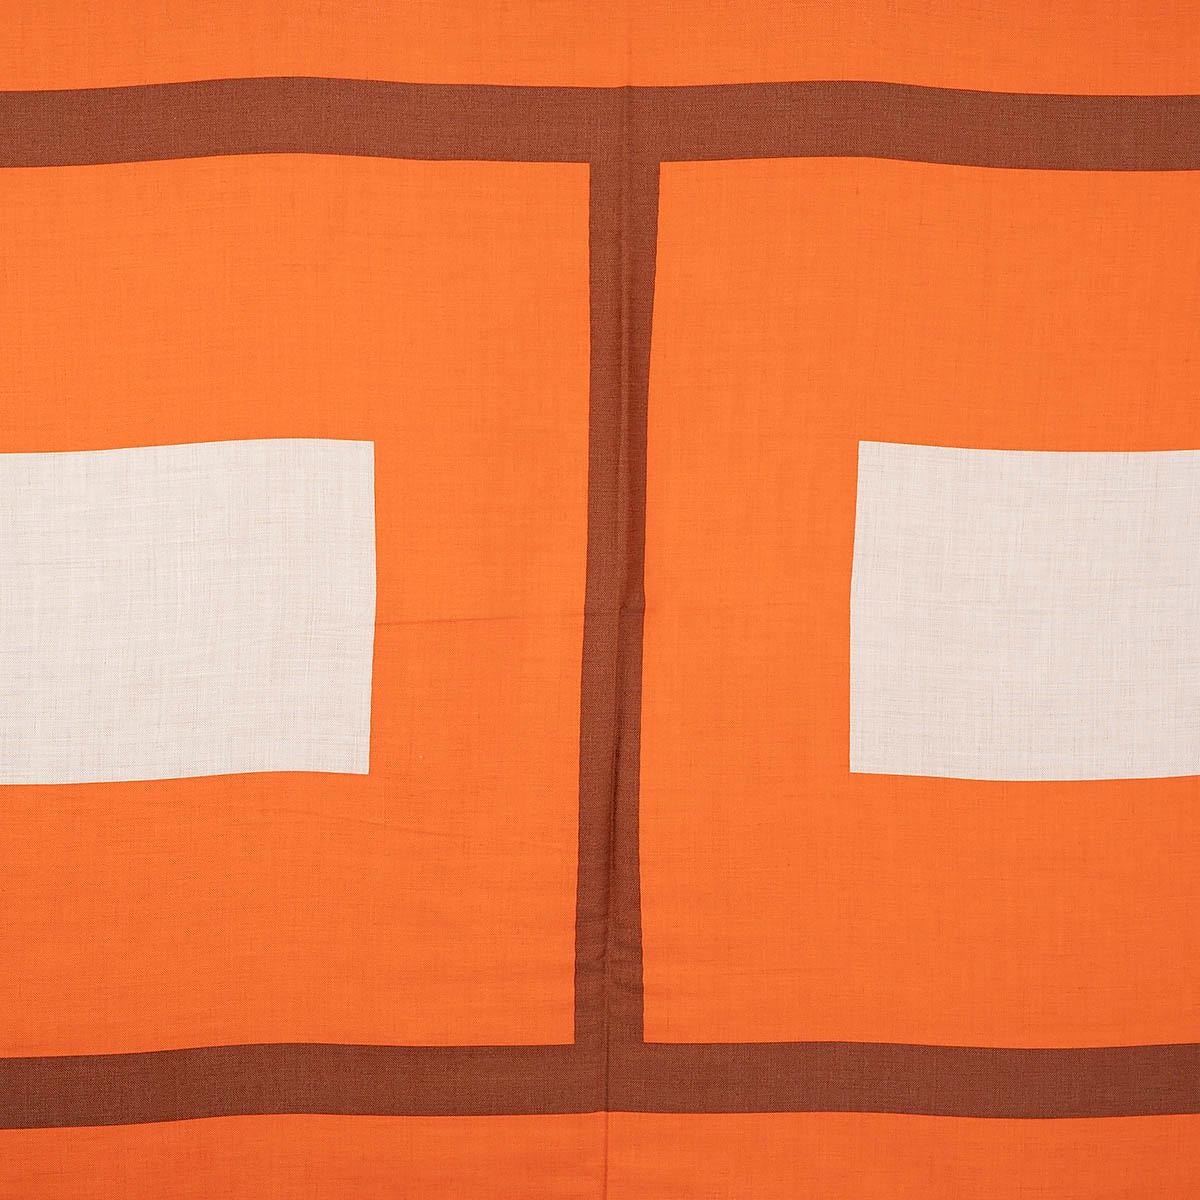 100% authentic Hermès H Jumping shawl in natural cashmere (70%) and silk (30%) with orange and caramel brown H print. Finished with hand-rolled and fringed edges. Brand new.

Measurements
Width	90cm (35.1in)
Length	180cm (70.2in)

All our listings